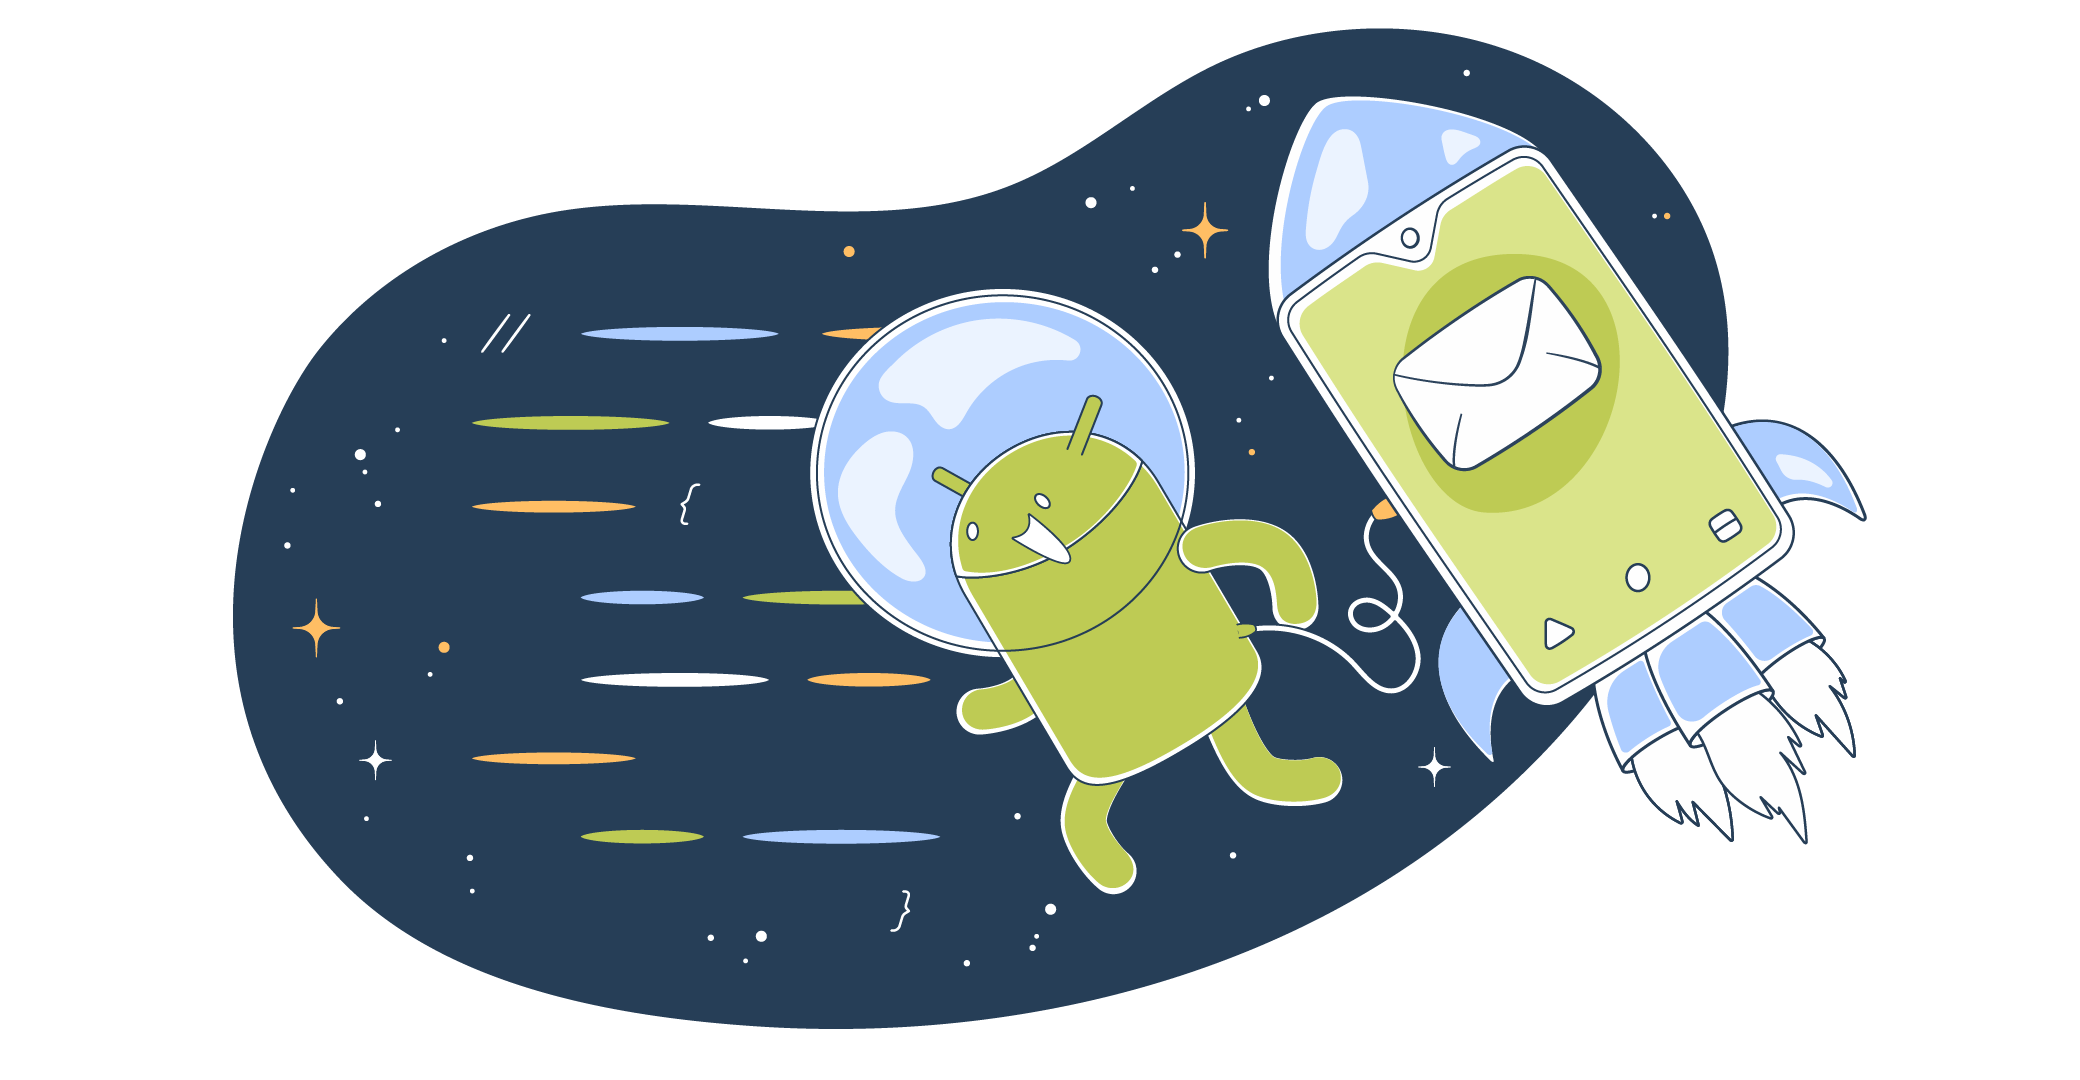 This is image is a symbolic graphic representation of Android Intent send email for the article that covers the topic in detail.